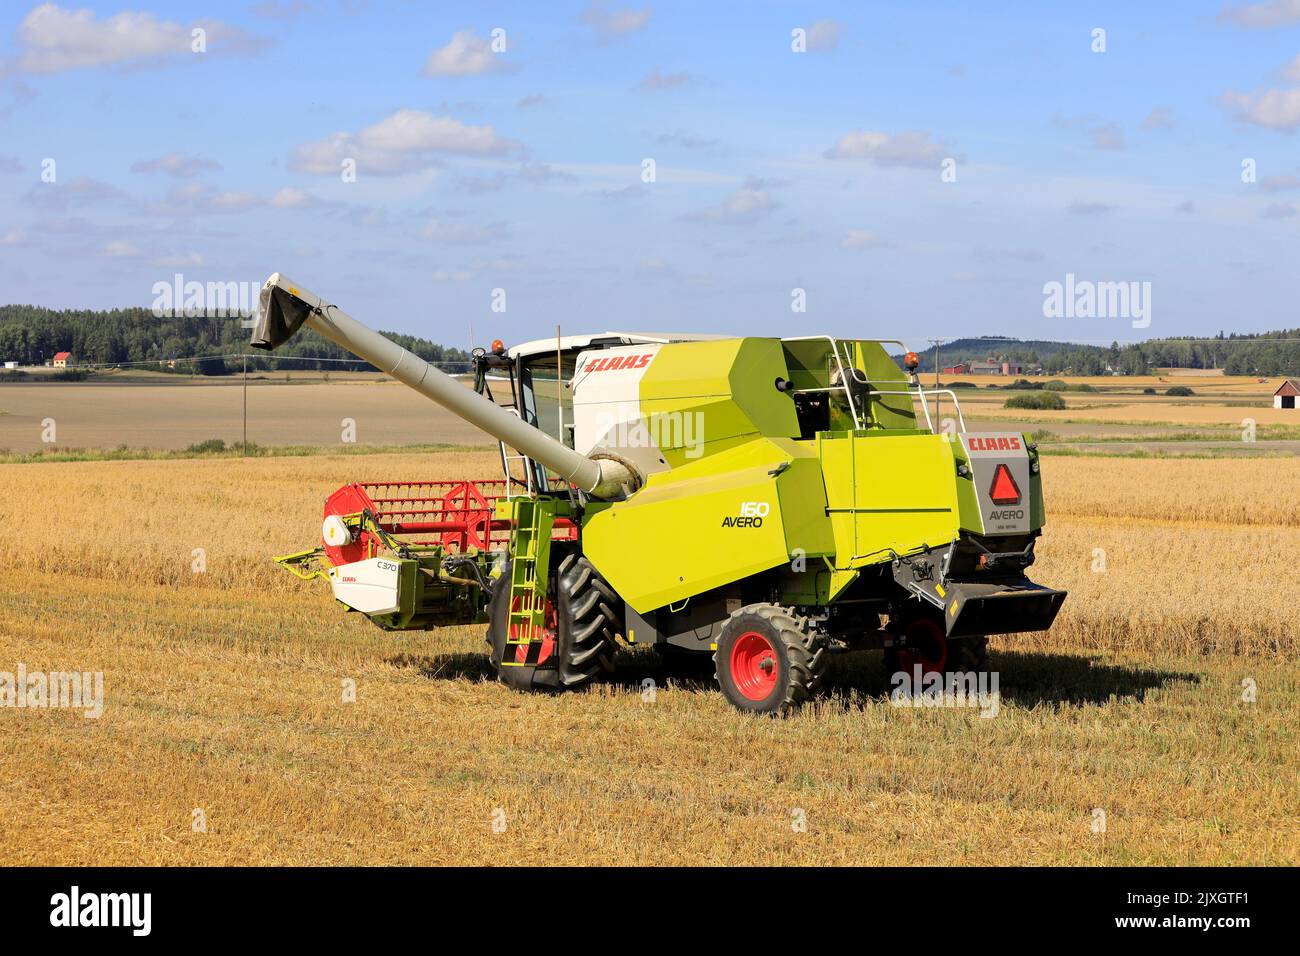 Claas Avero 160 combine harvester in partially harvested ripe oat field on a sunny day of August. Salo, Finland. August 27, 2022. Stock Photo